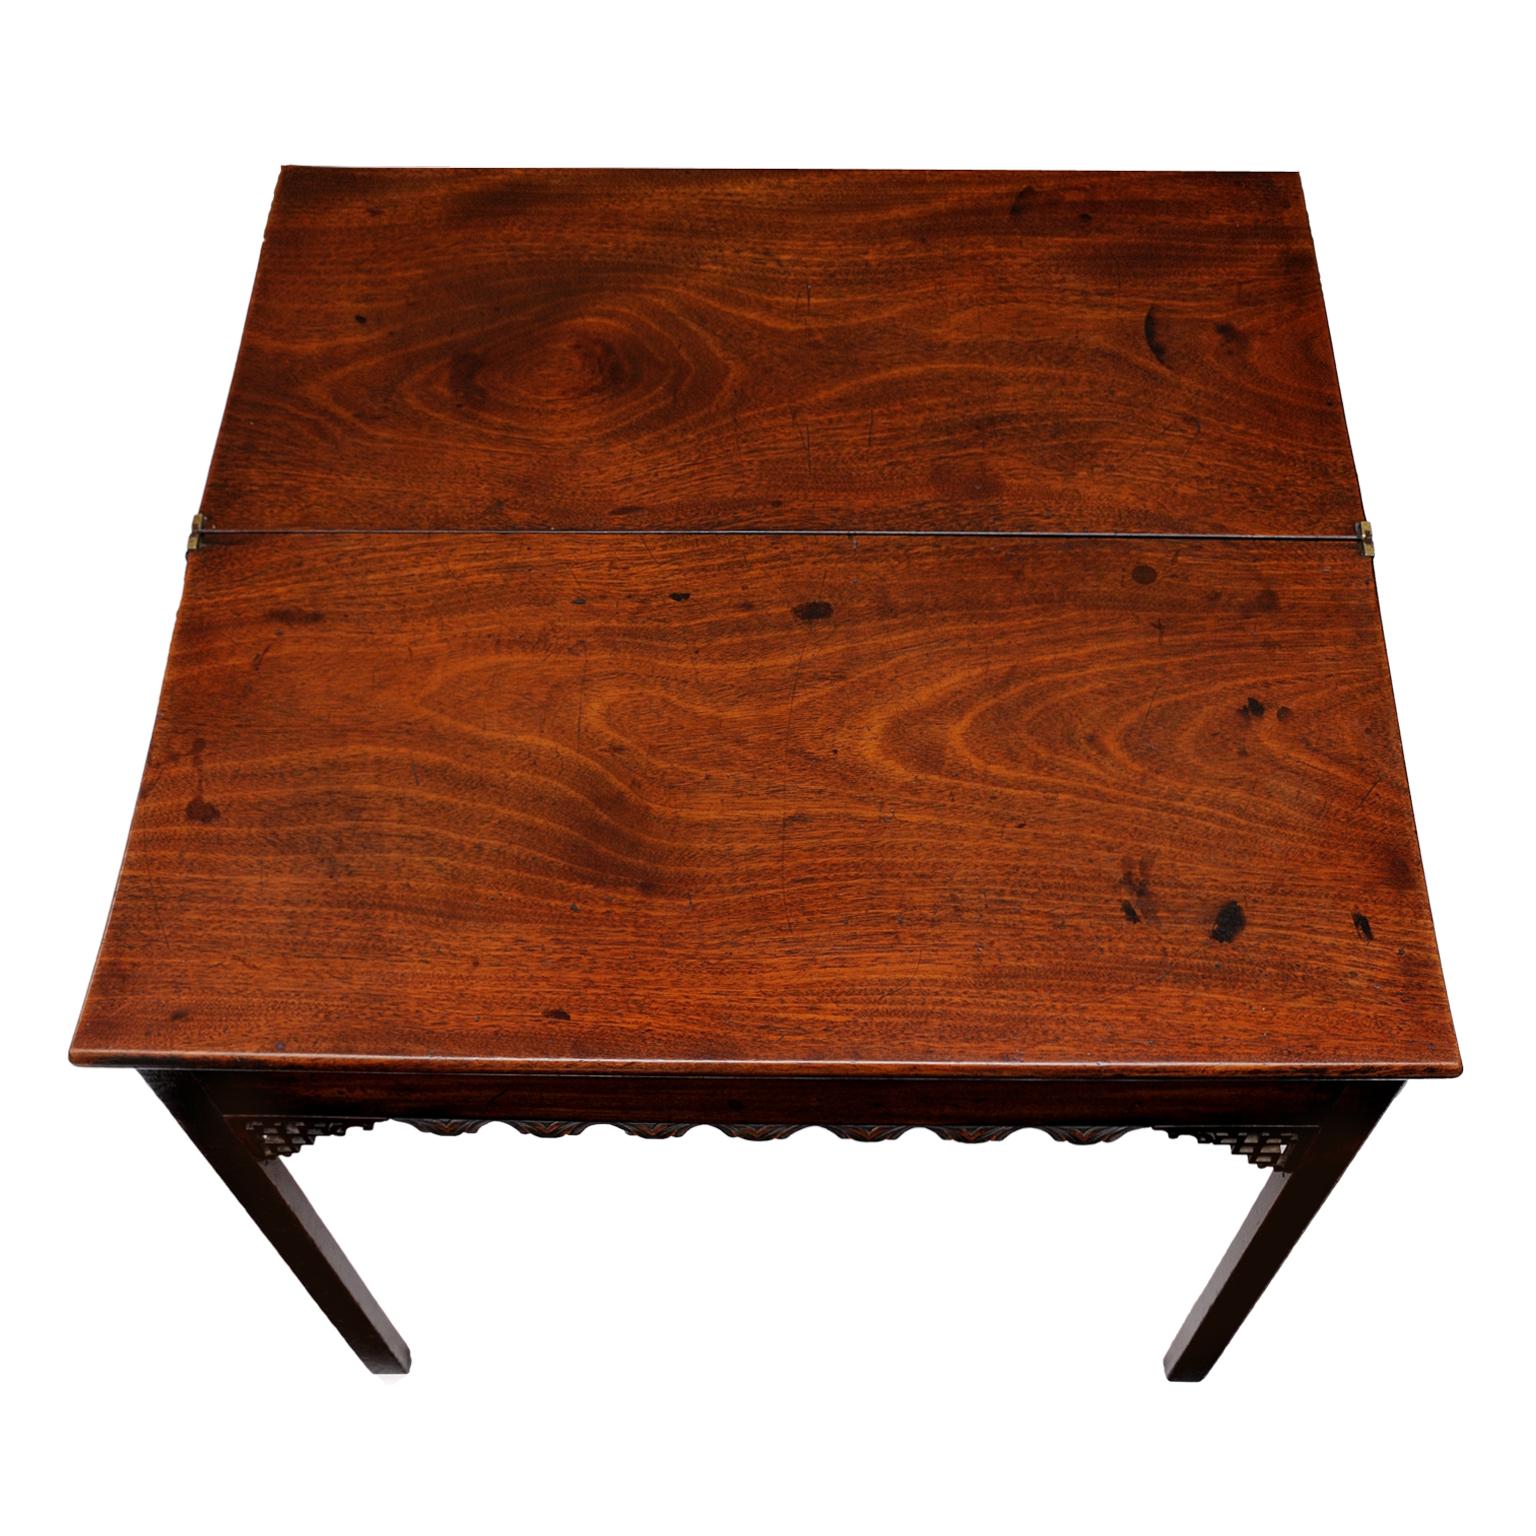 Irish George III Chippendale Period Mahogany Tea Table, circa 1760 In Good Condition For Sale In Tetbury, Gloucestershire